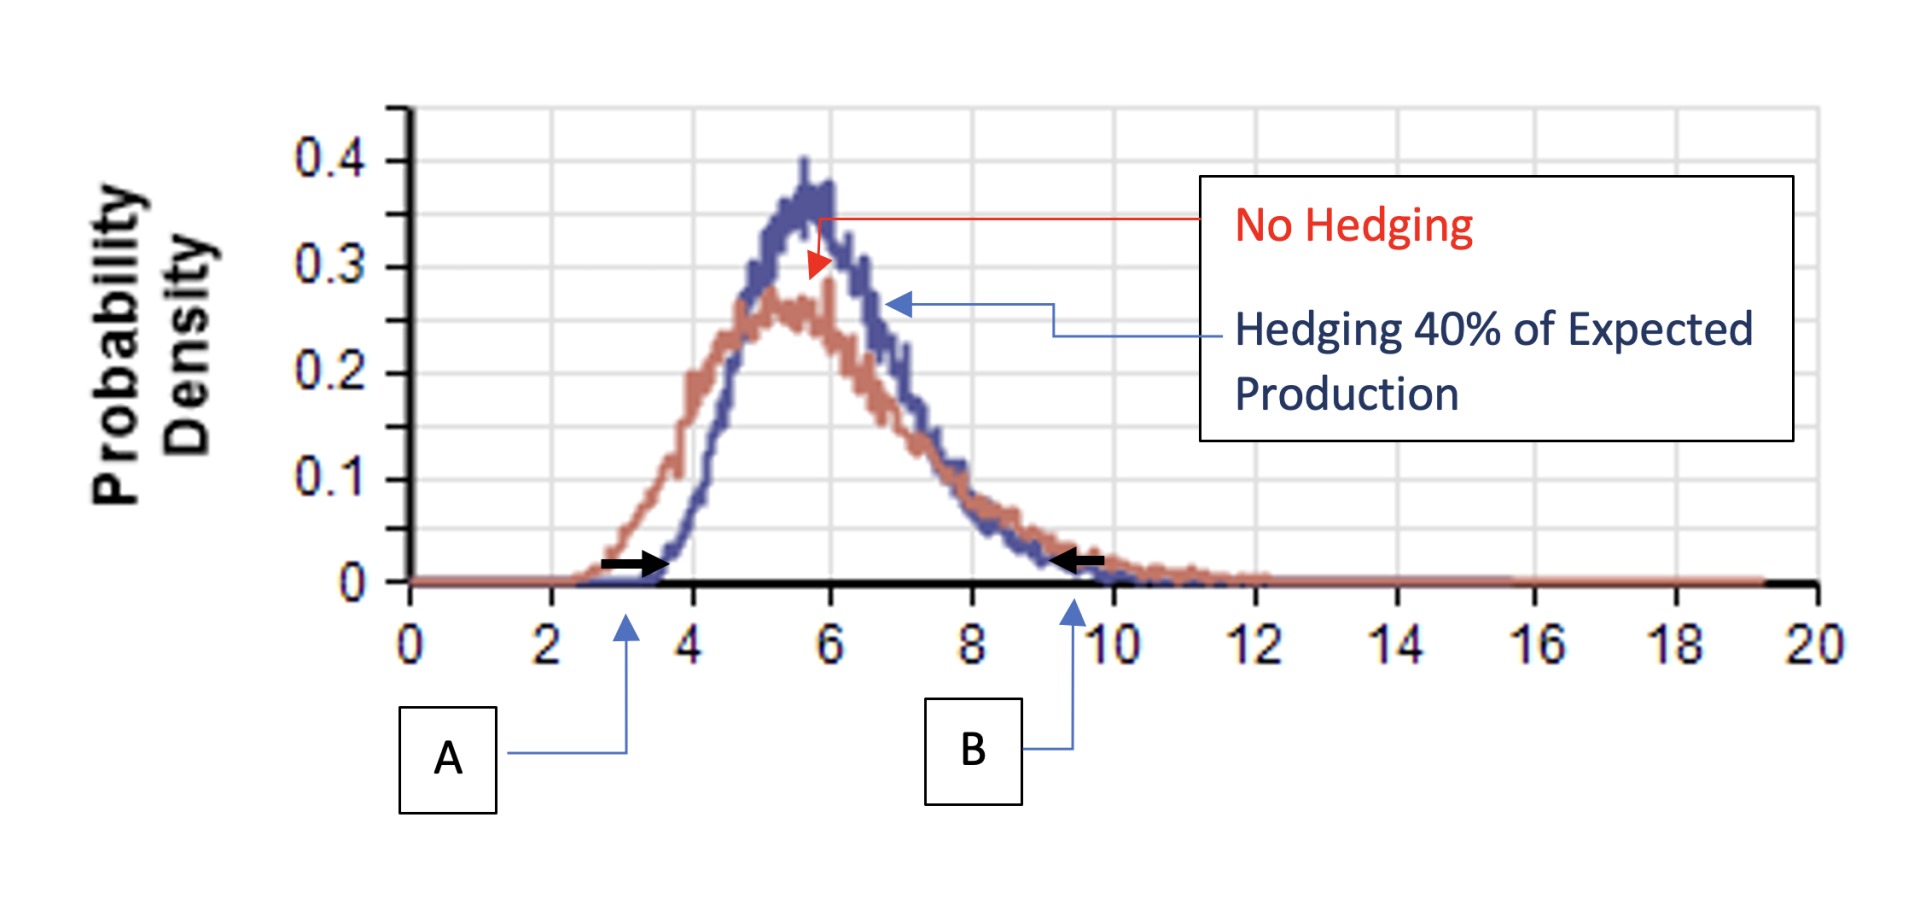 Figure 5, Average Farm Price Distribution with and without Hedging